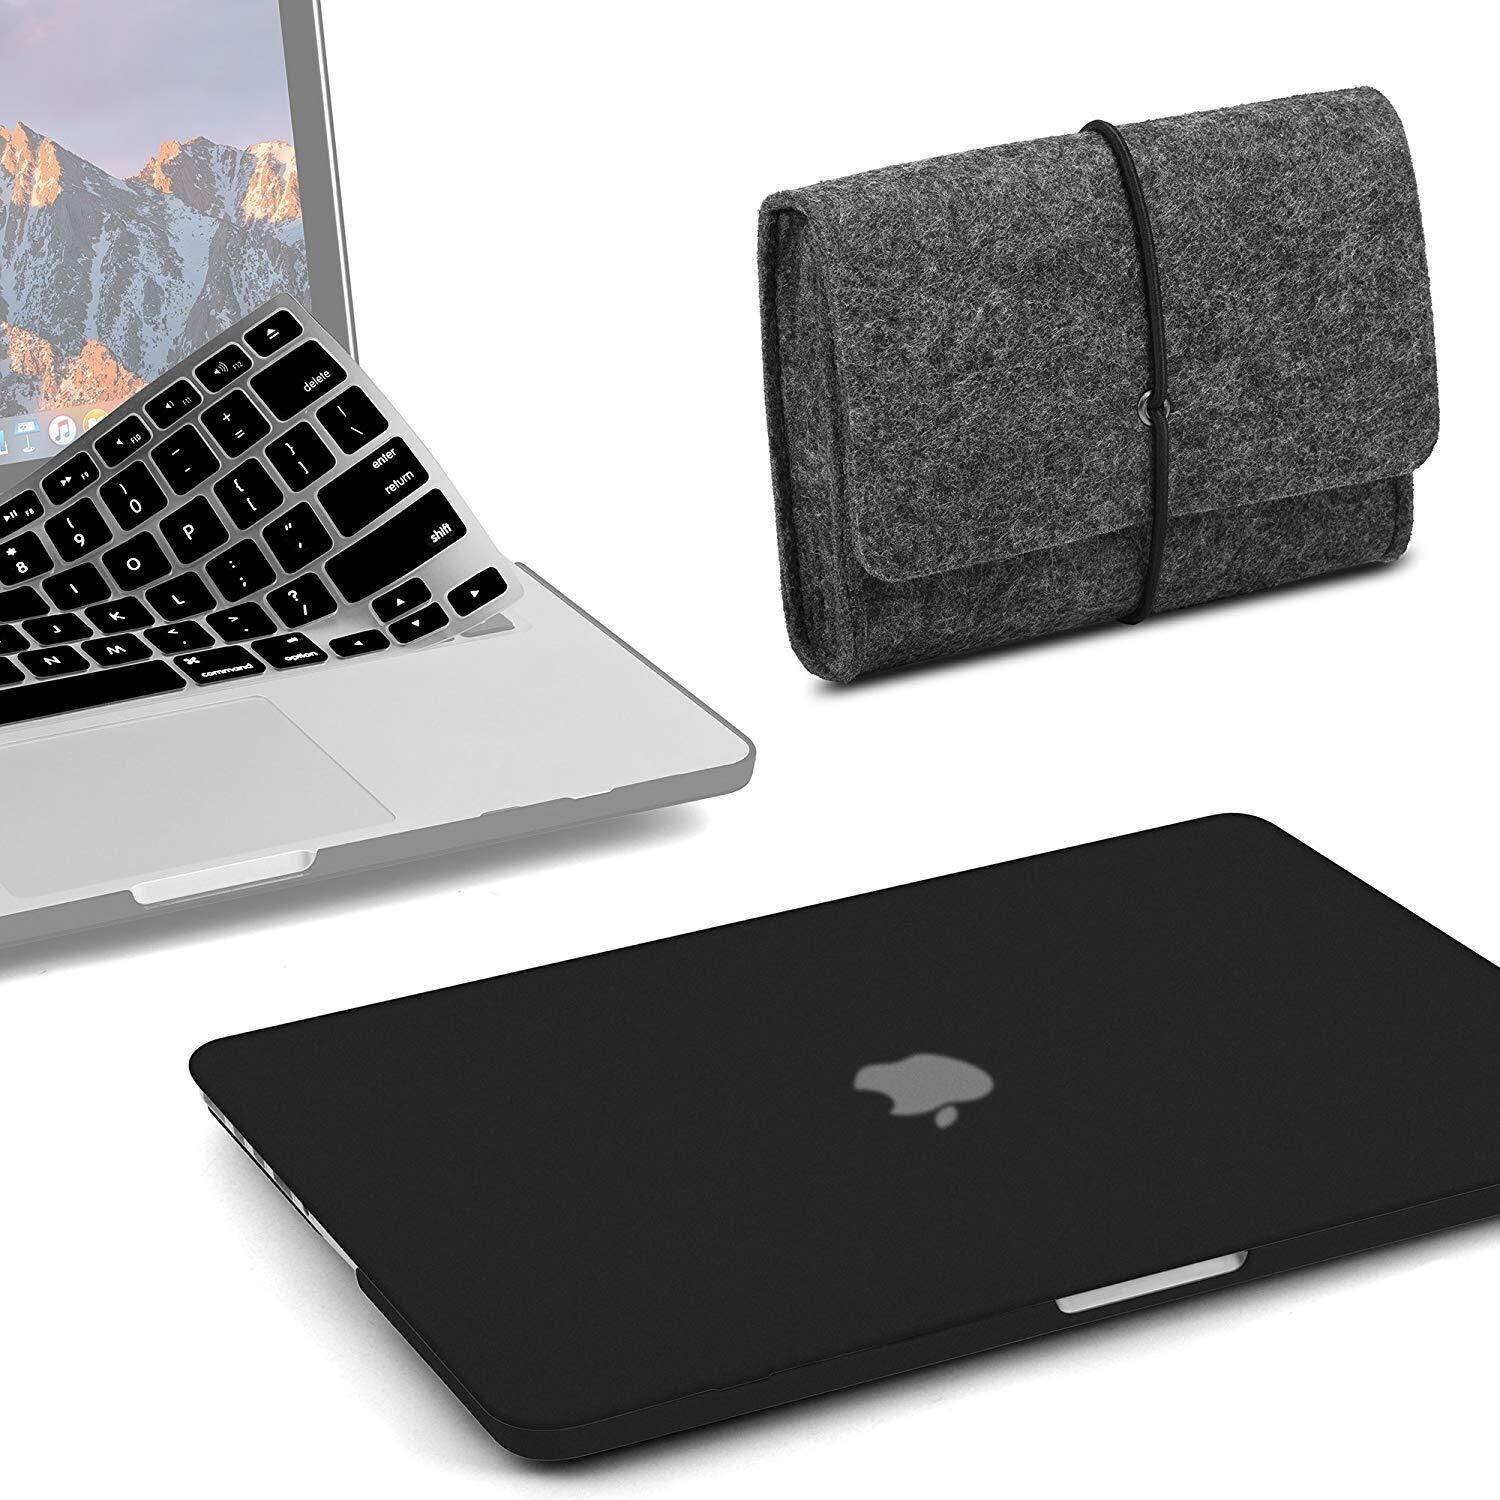 Best price for mac air laptop